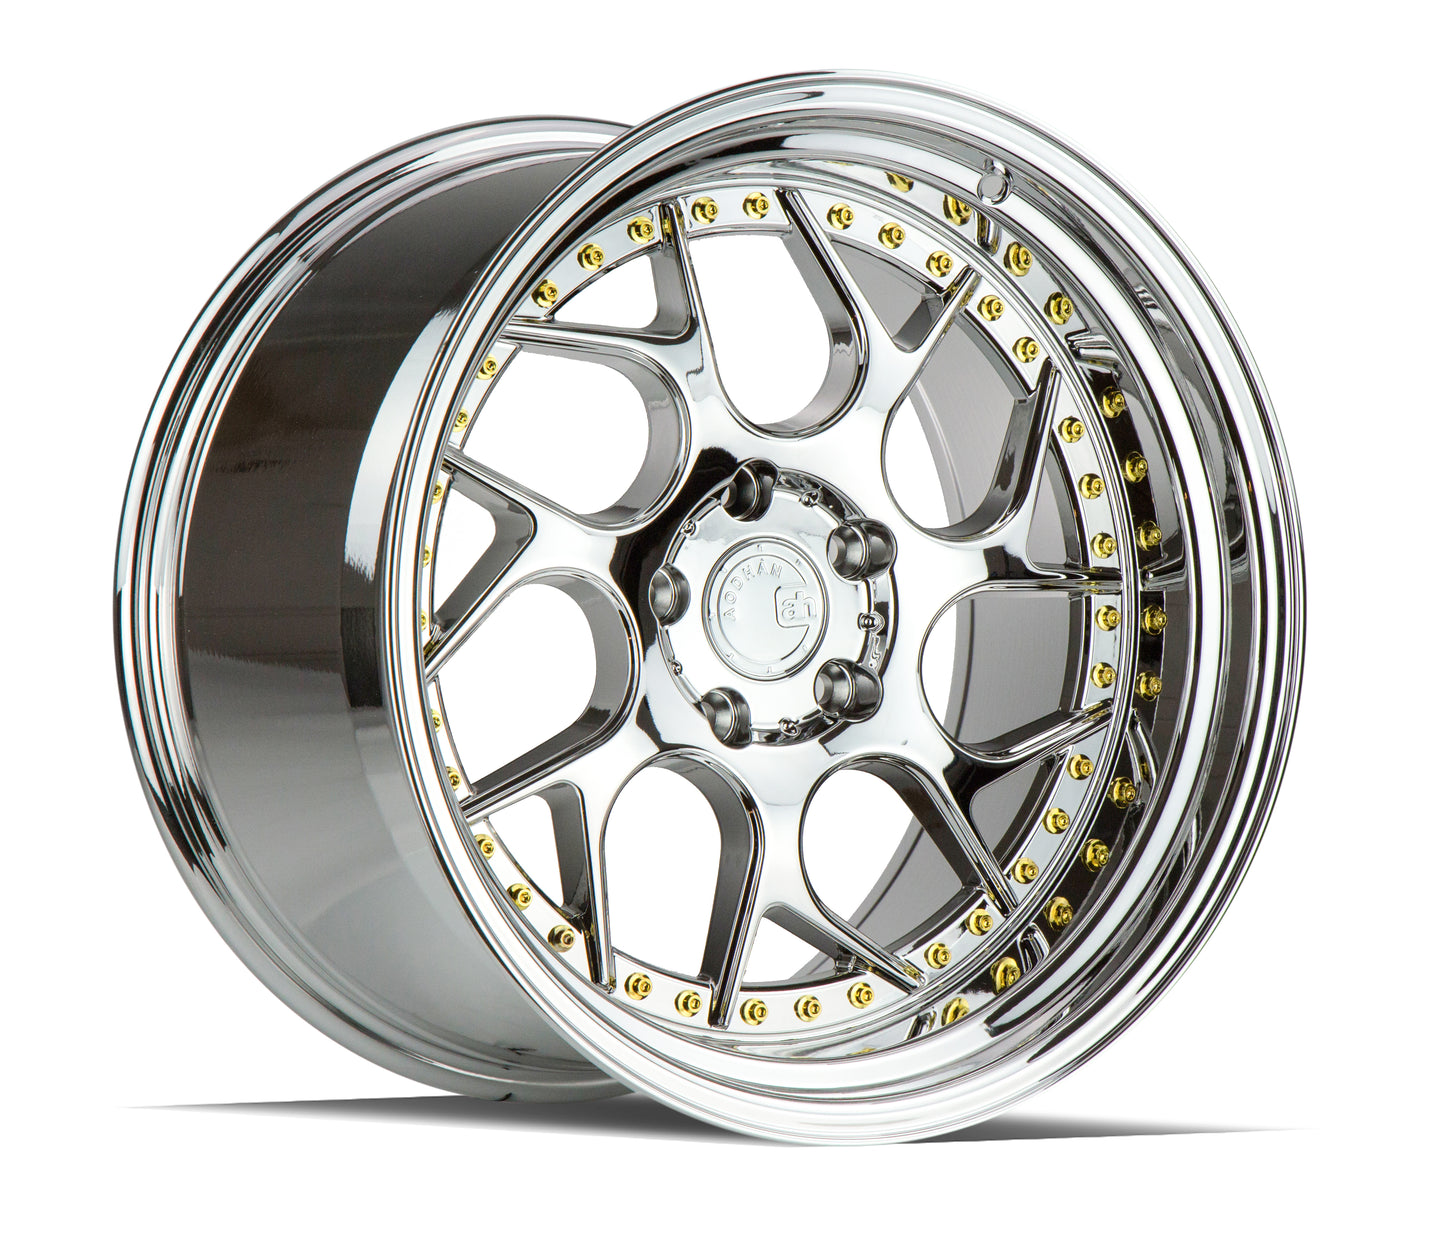 18" Aodhan DS01 Vacuum Chrome w/ Gold Rivets 5x114.3 ( Staggered Setup )